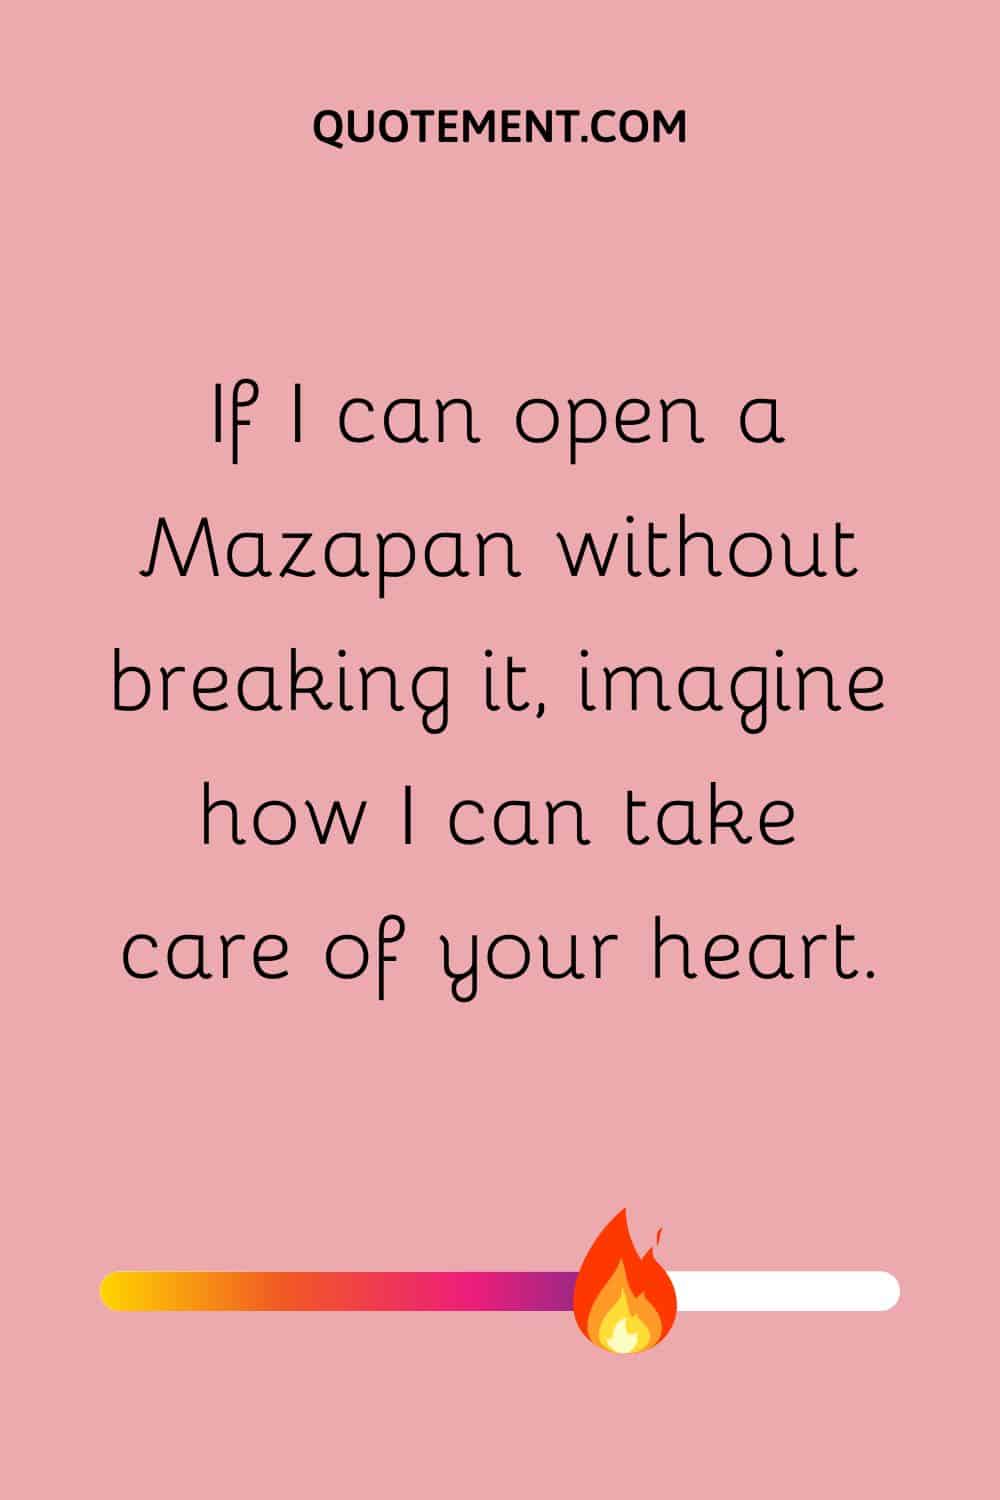 If I can open a Mazapan without breaking it, imagine how I can take care of your heart